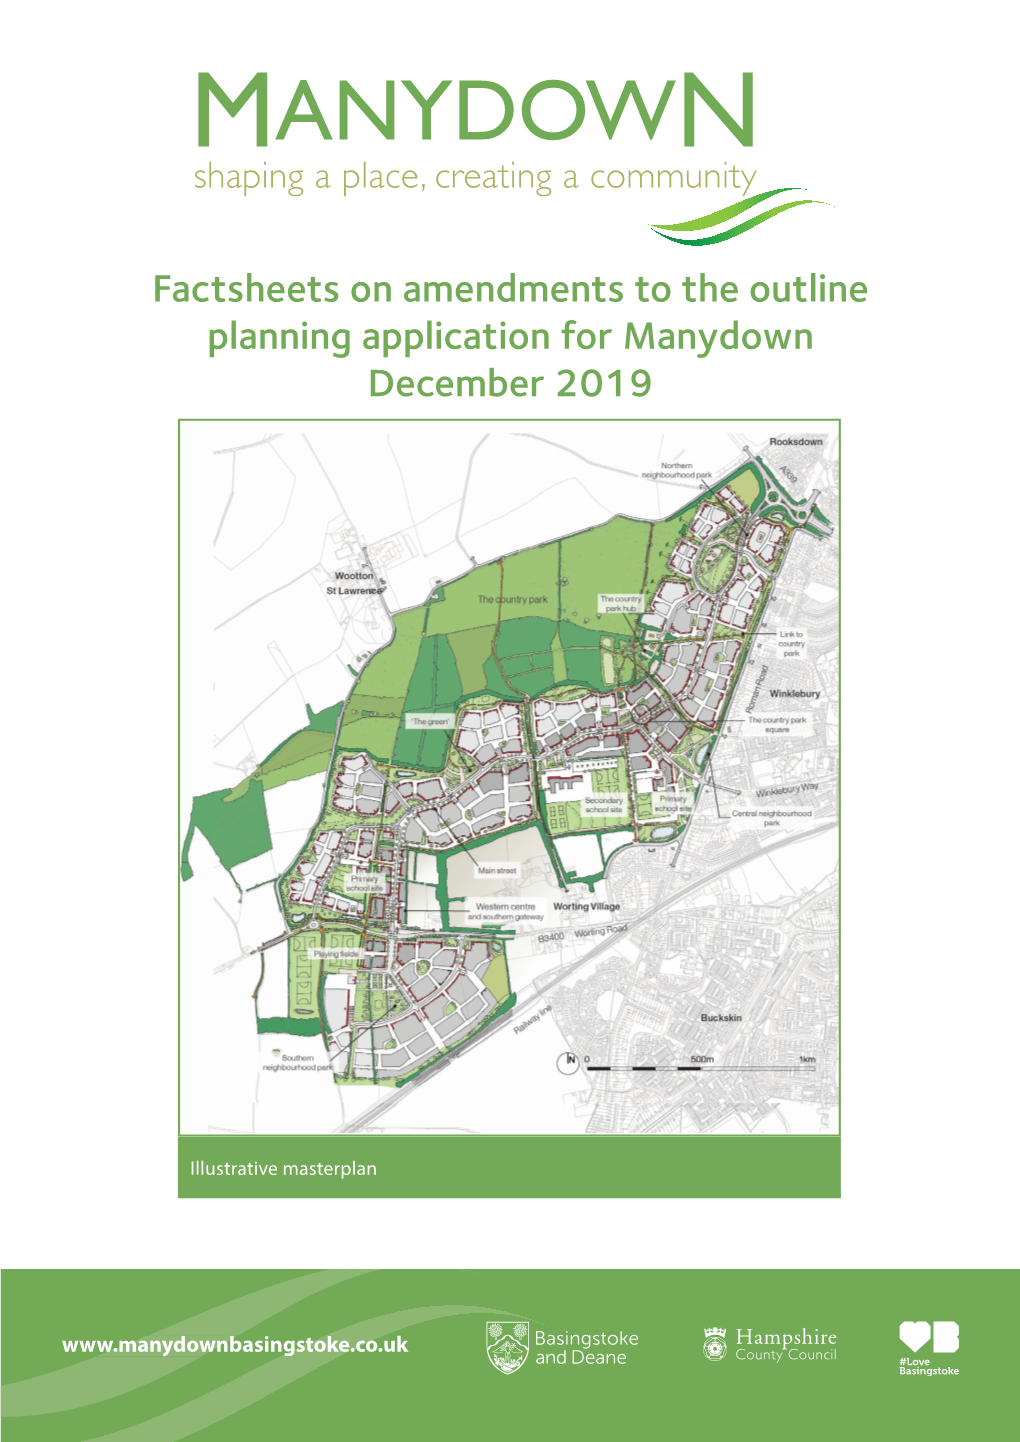 Factsheets on Amendments to the Outline Planning Application for Manydown December 2019